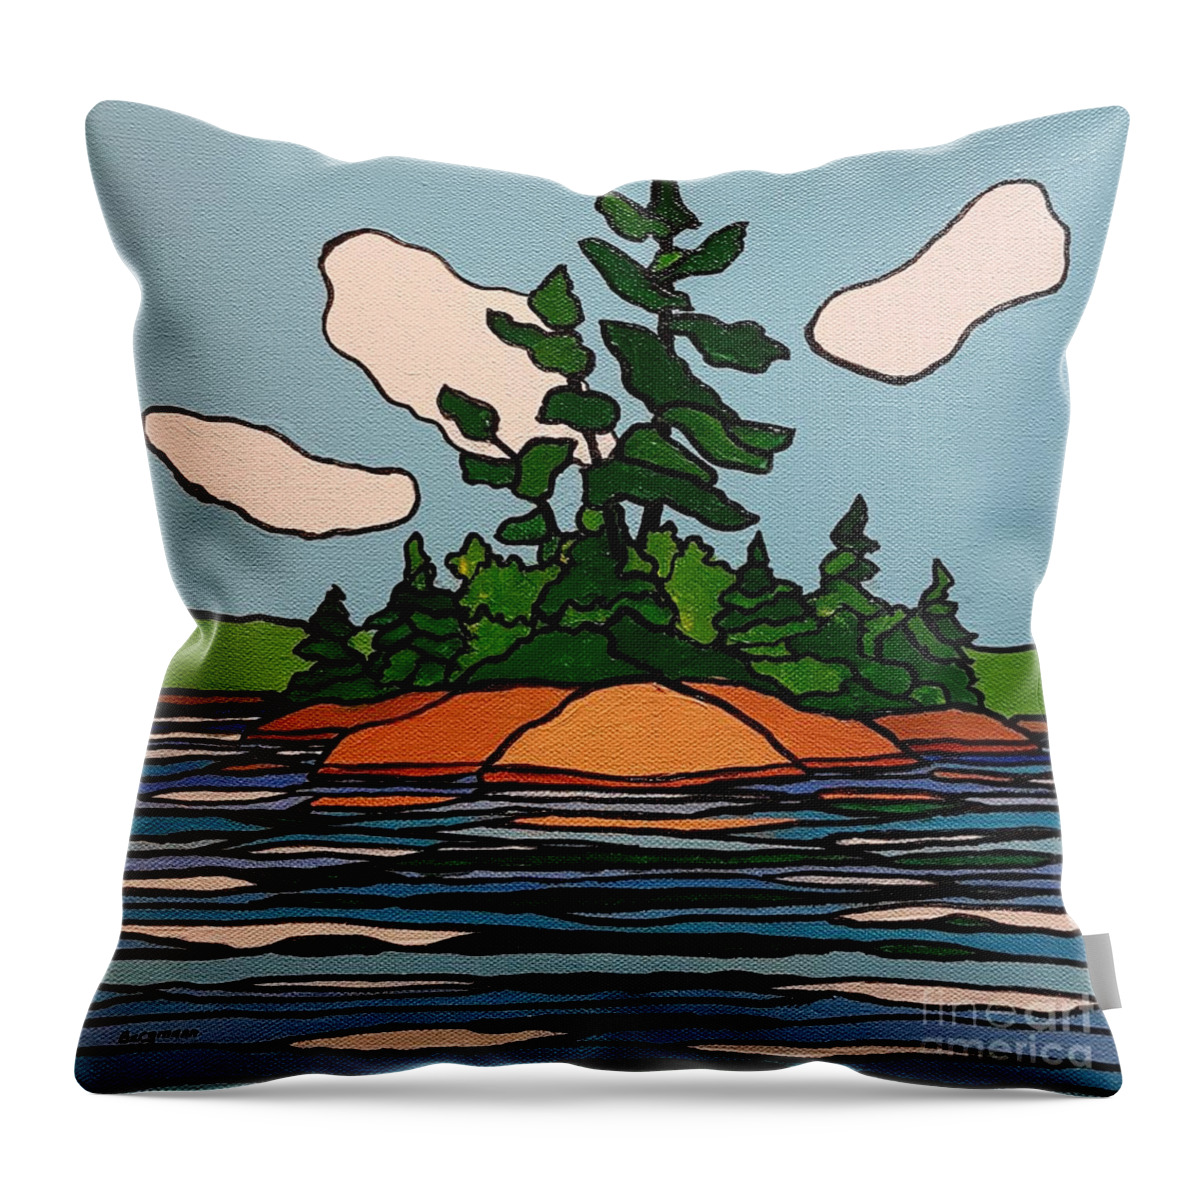 Landscape Throw Pillow featuring the painting A Place to Rest by Petra Burgmann